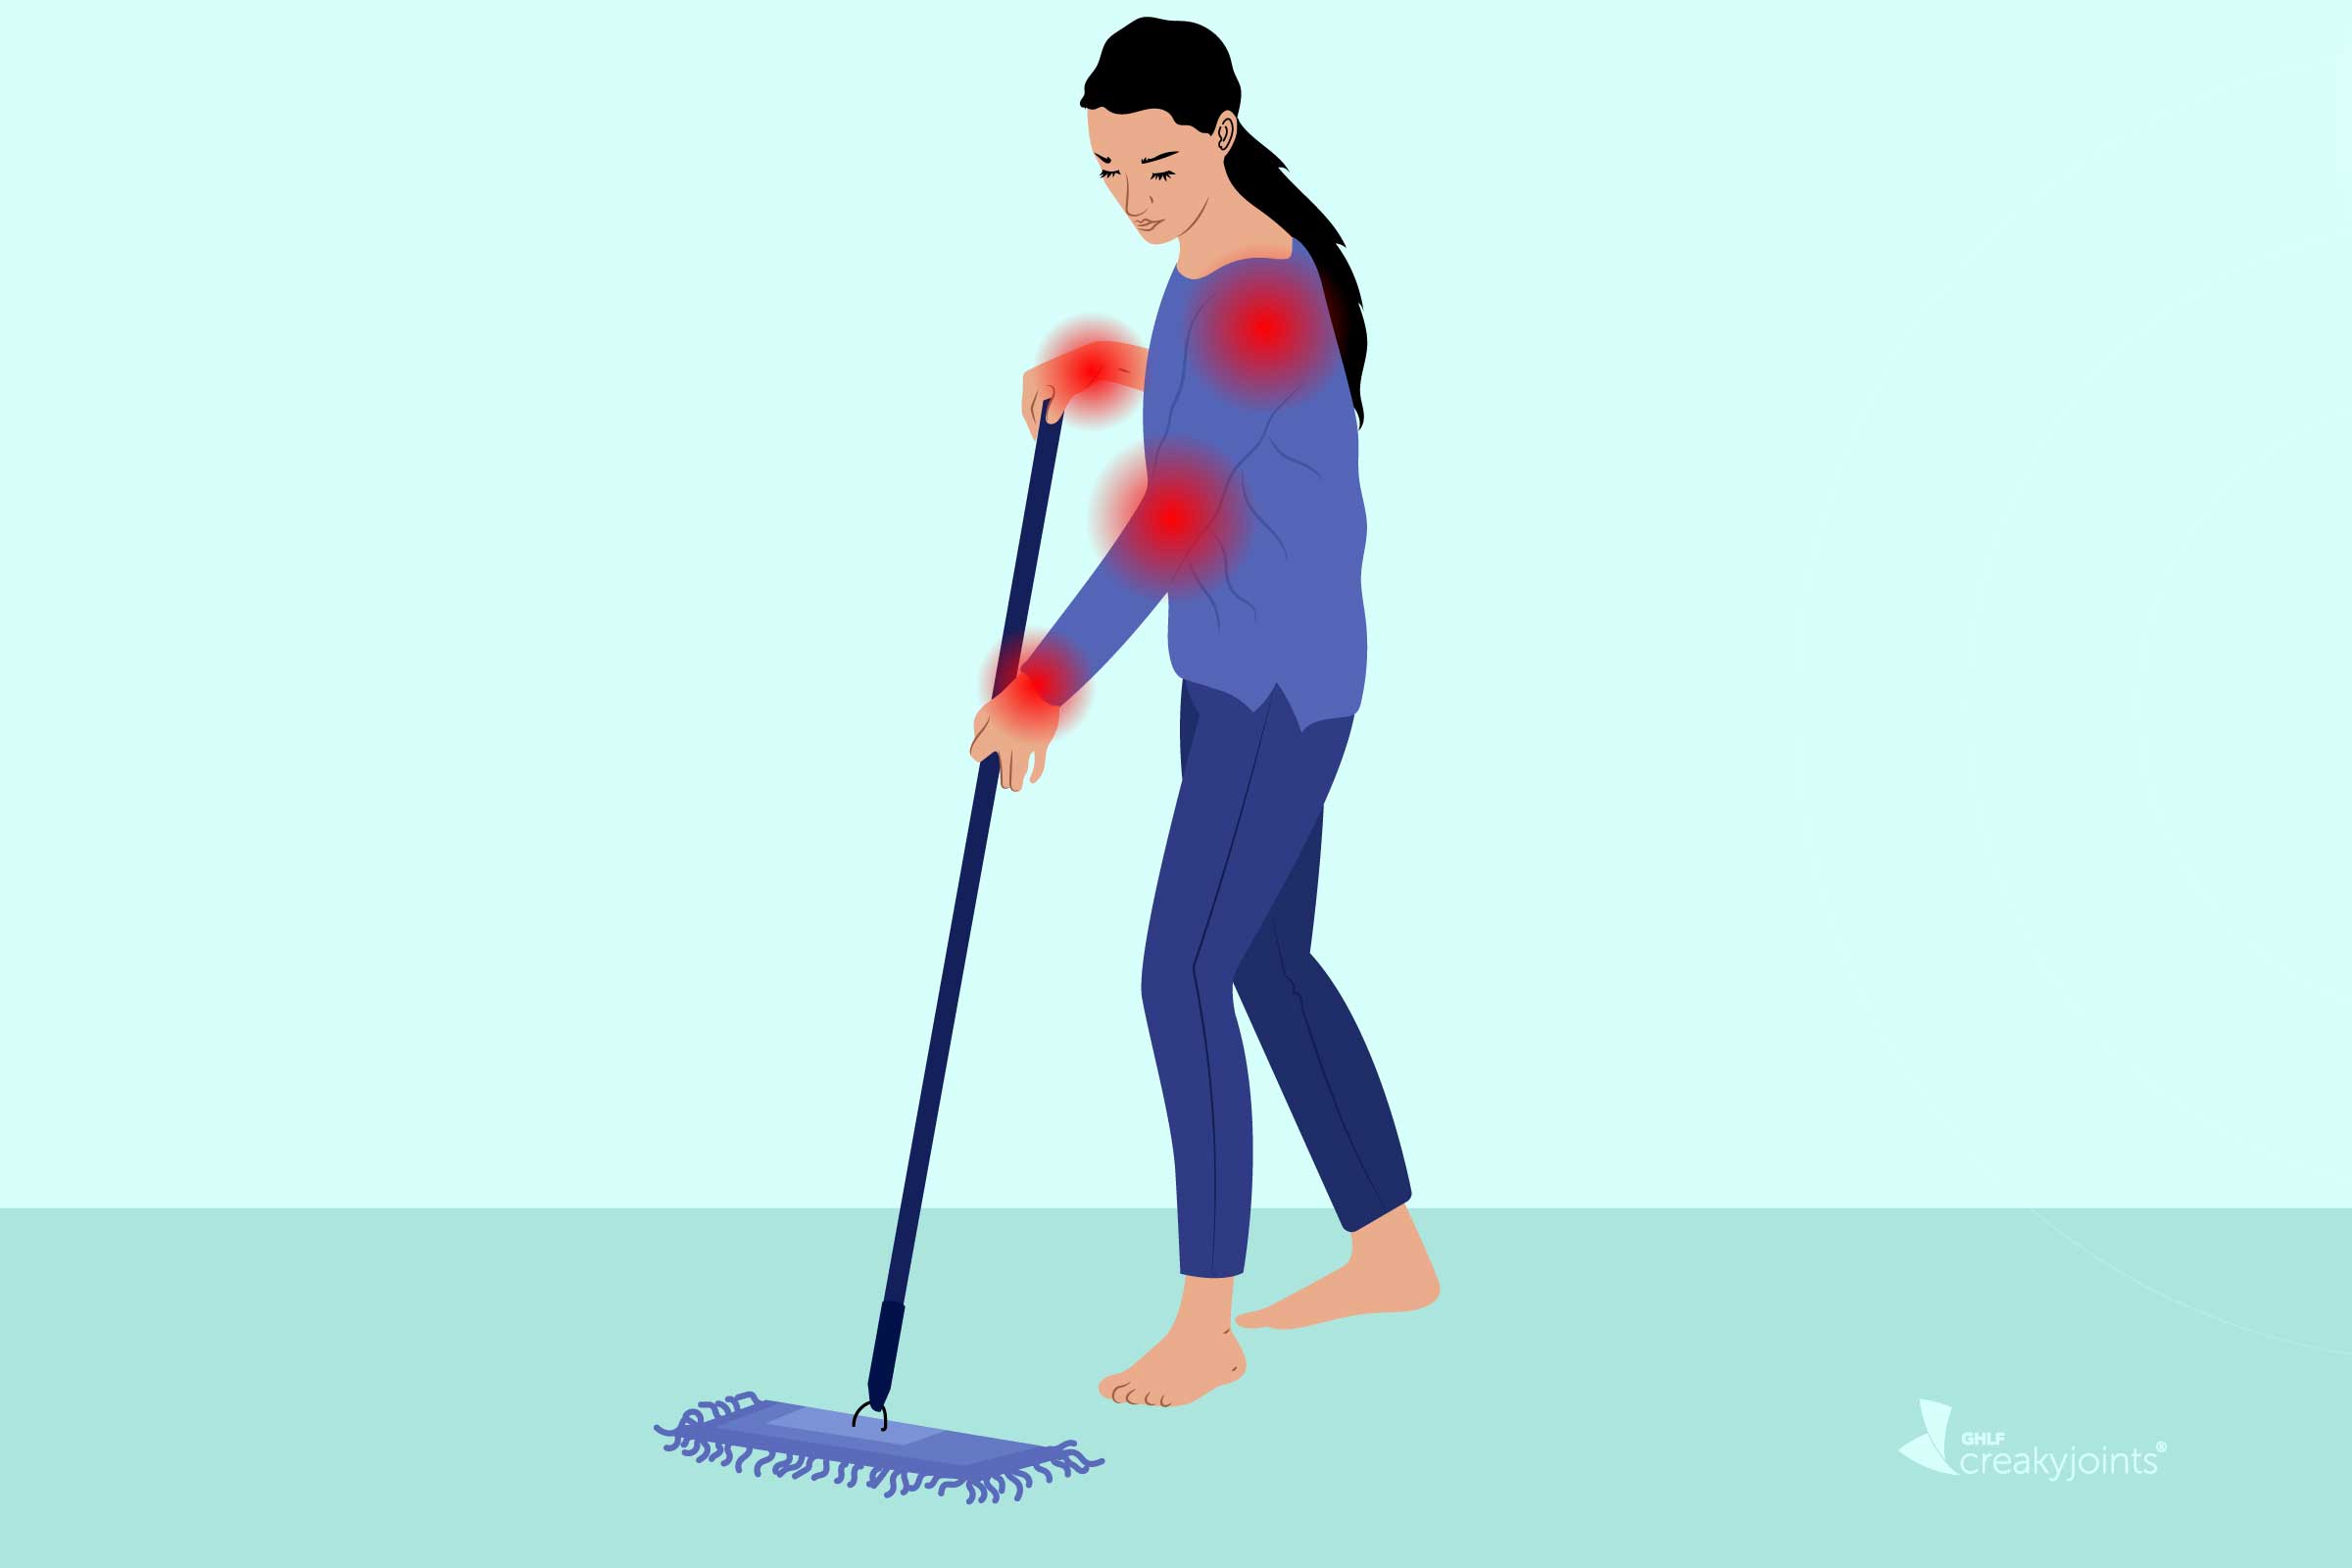 Cleaning with Arthritis: How to Make It Easier